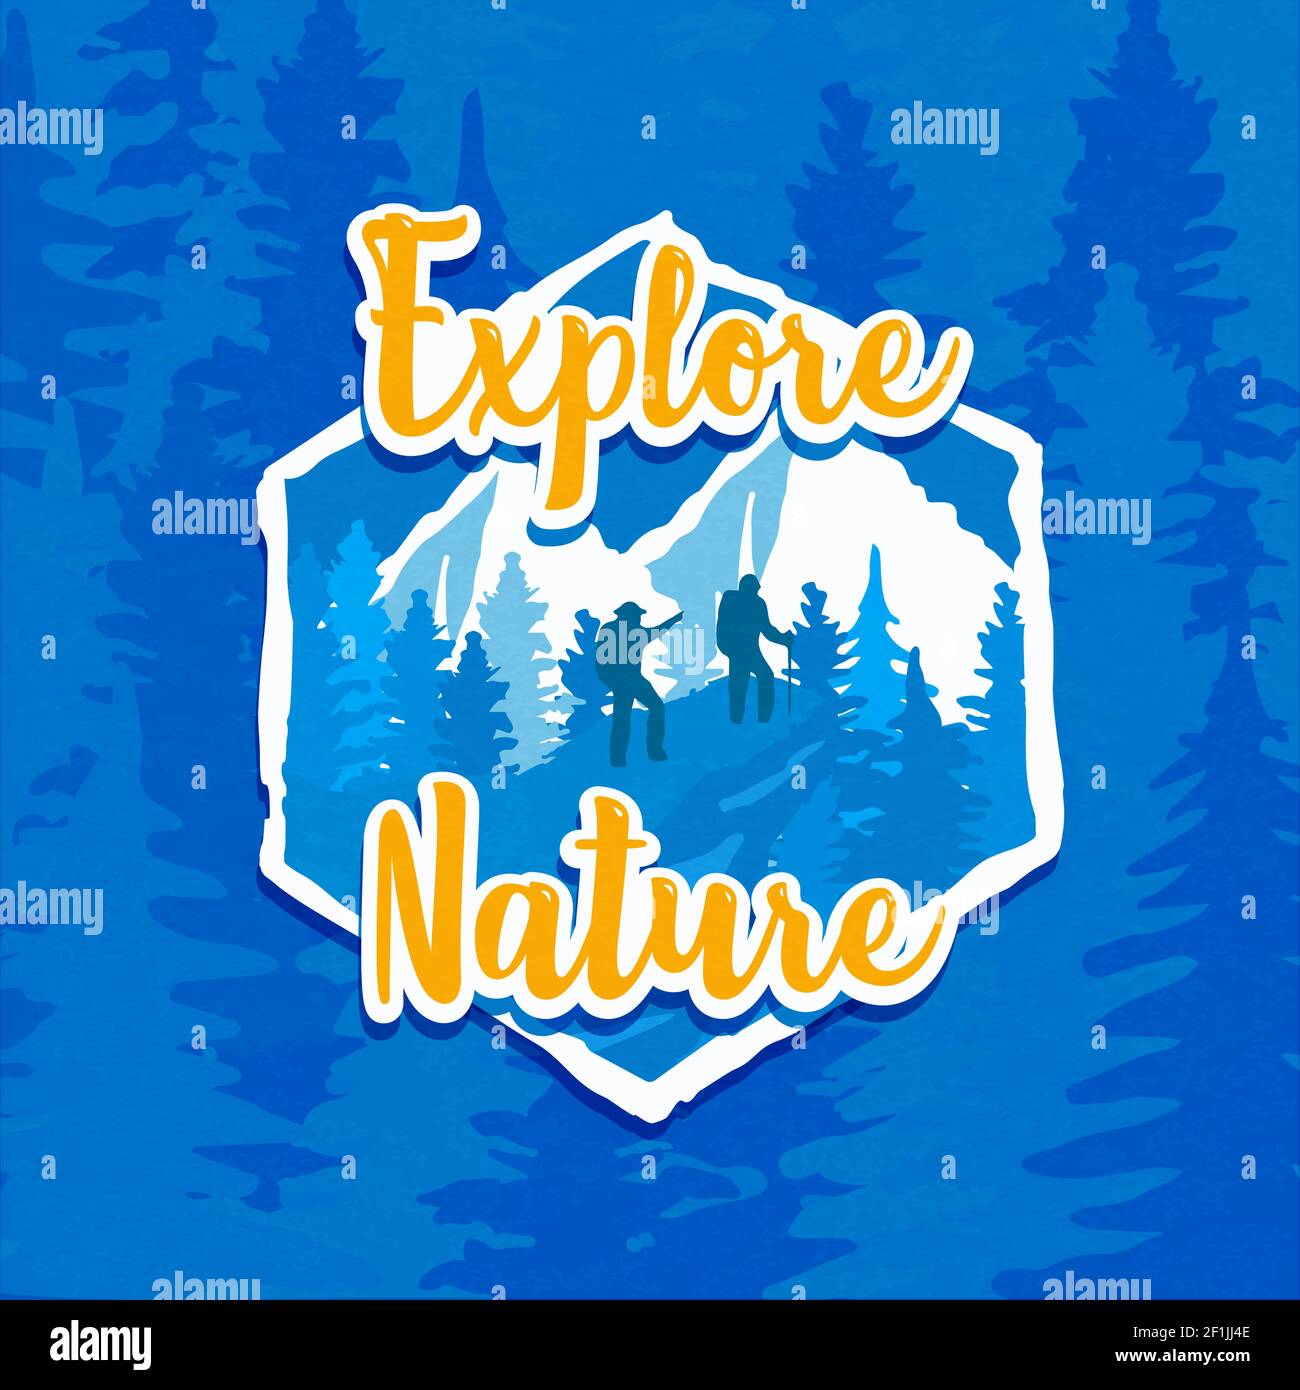 Explore Nature illustration of forest landscape with people climbing in mountain peak. Eco tourism or outdoor adventure concept. Stock Vector